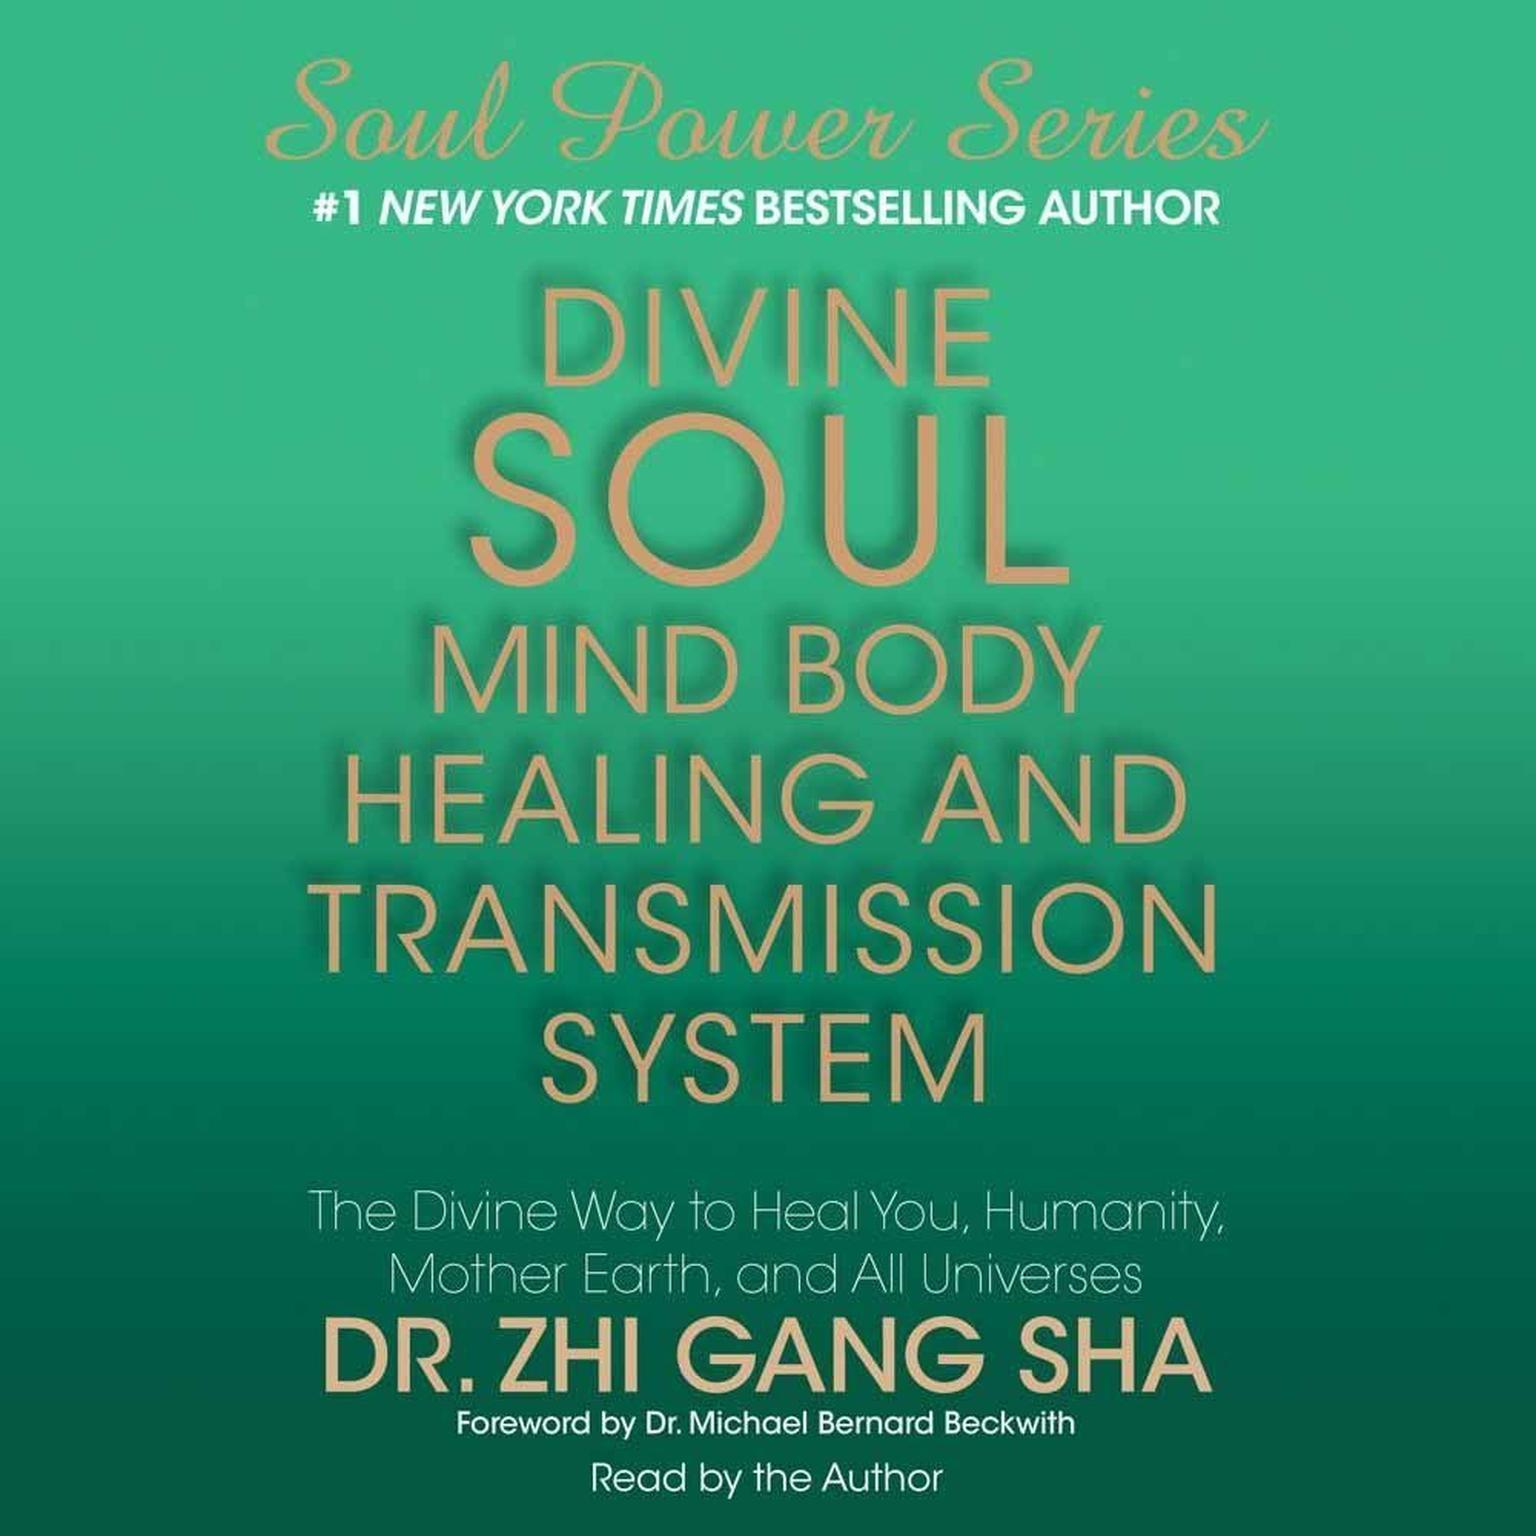 Divine Soul Mind Body Healing and Transmission System (Abridged): The Divine Way to Heal You, Humanity, Mother Earth, and All Universes Audiobook, by Dr. Zhi Gang Sha